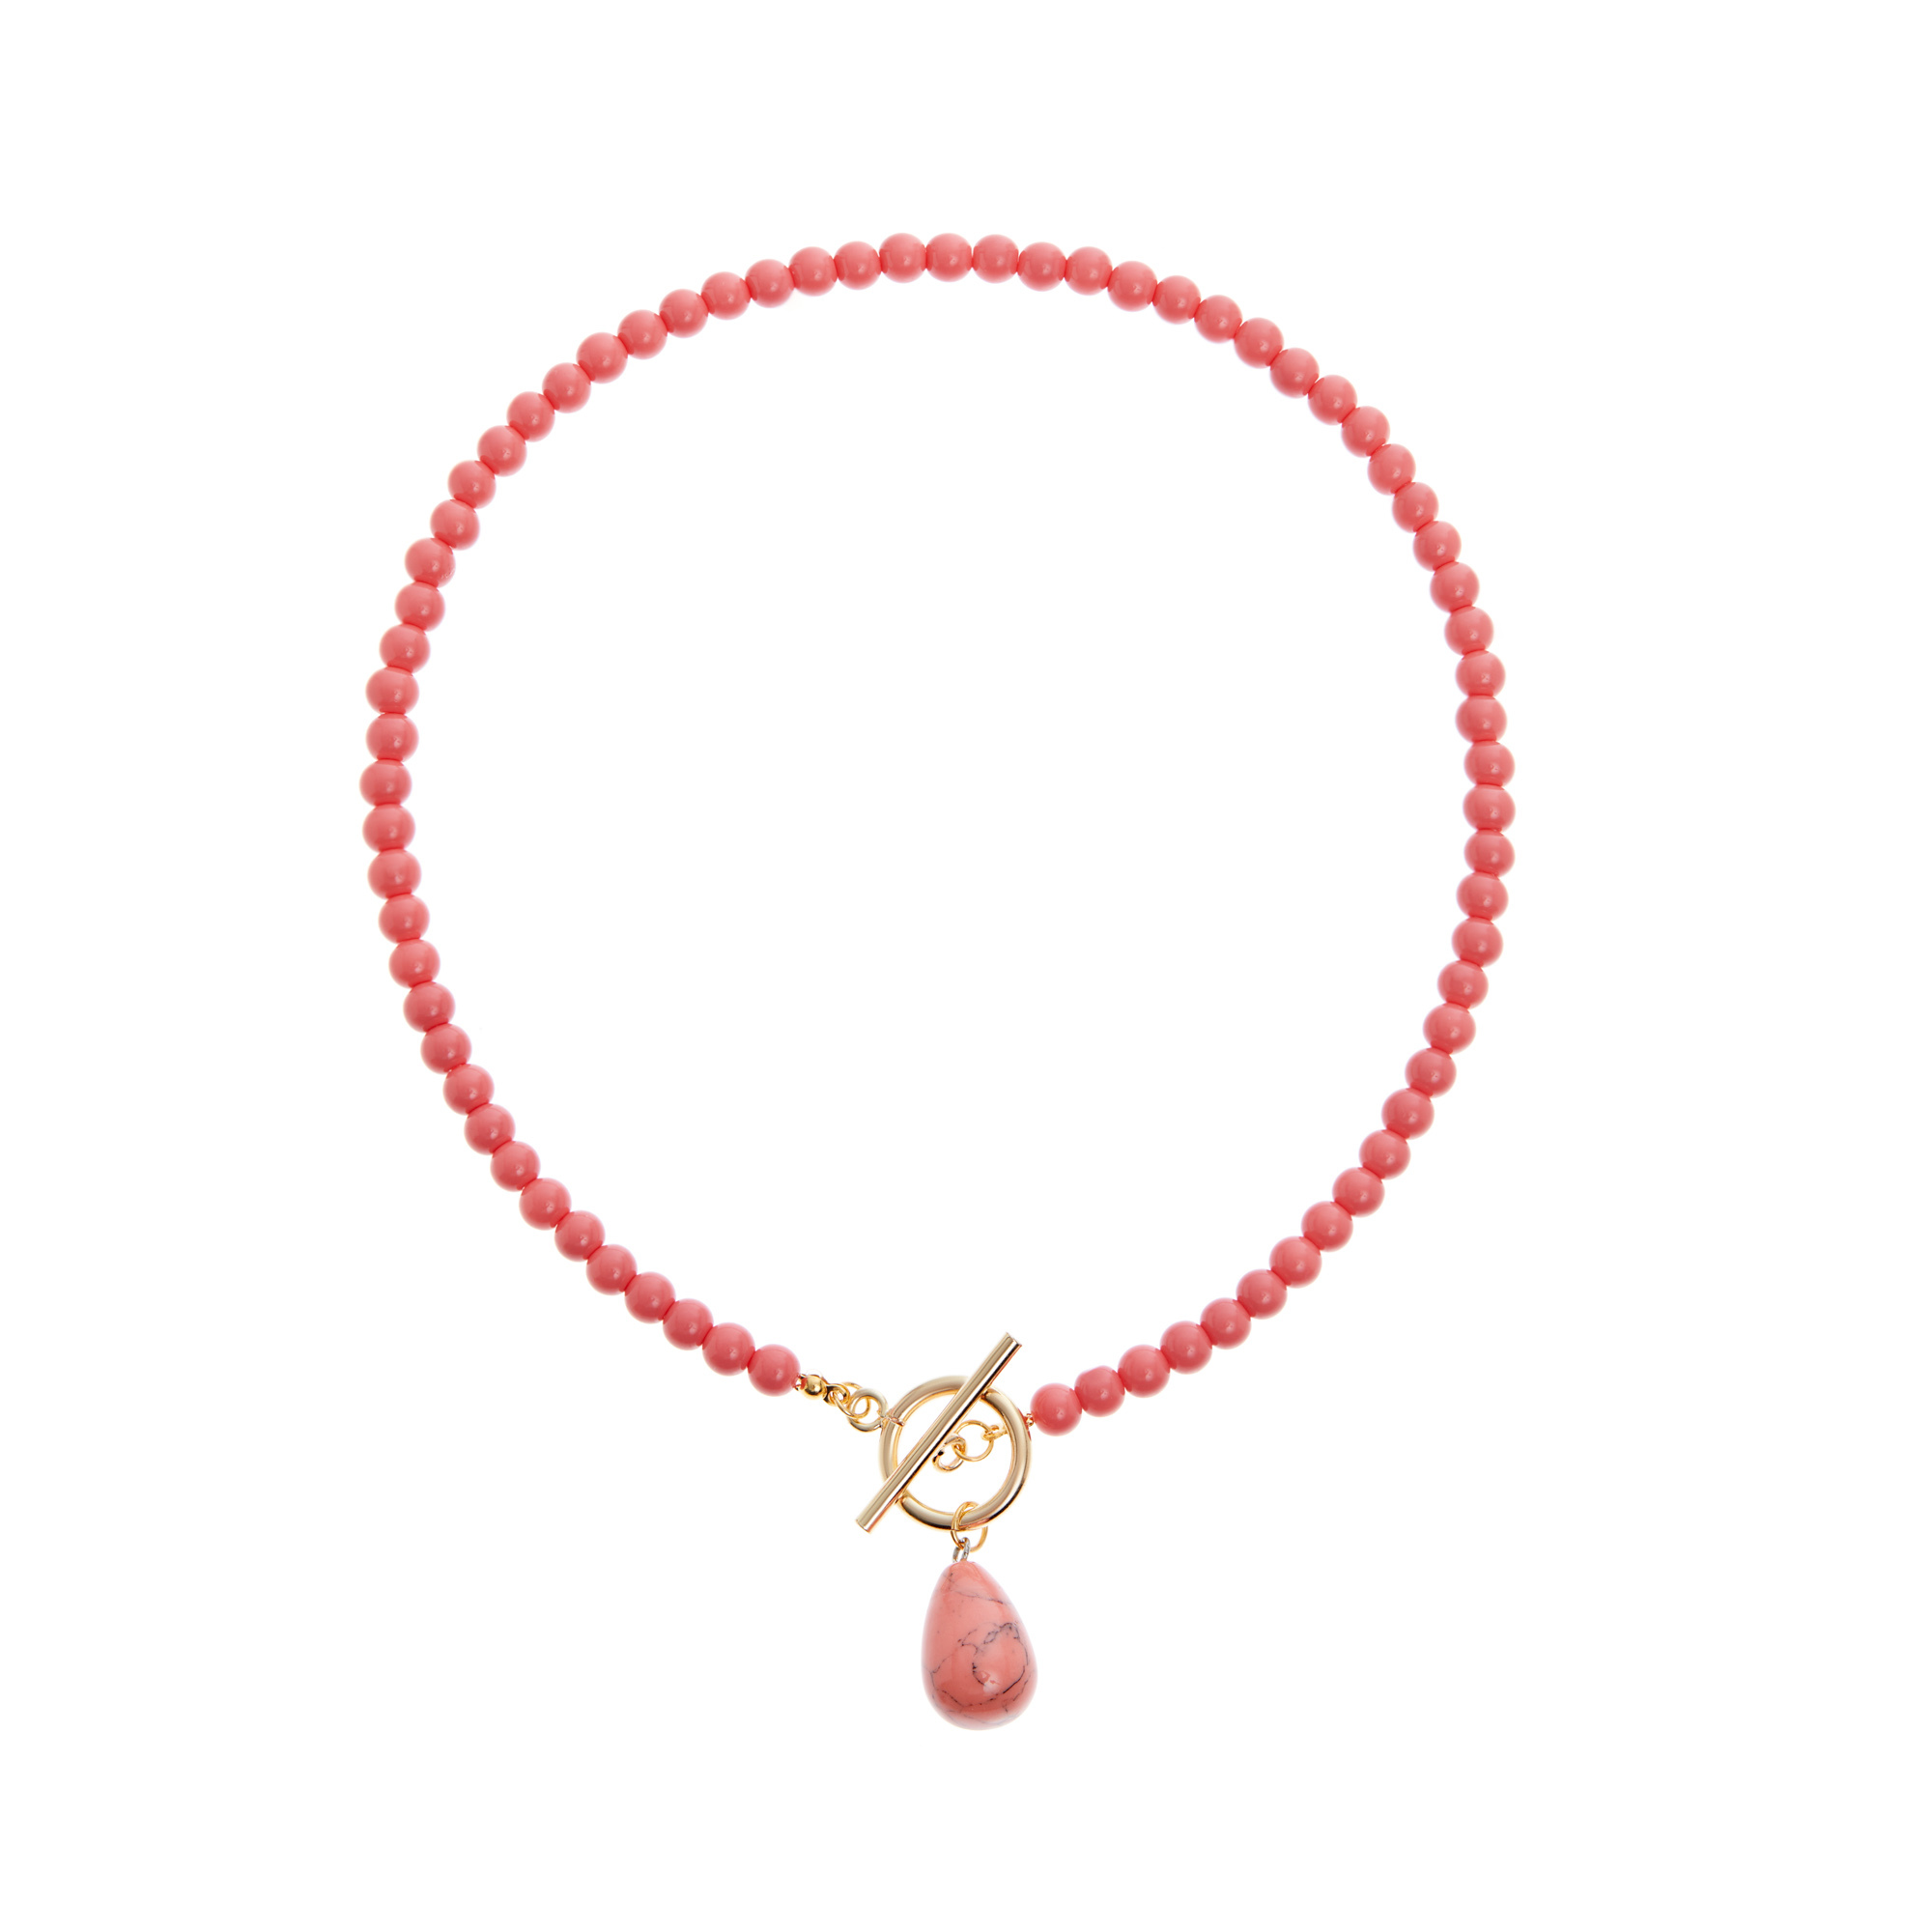 HOLLY JUNE Колье Drop Necklace – Coral holly june колье sally necklace